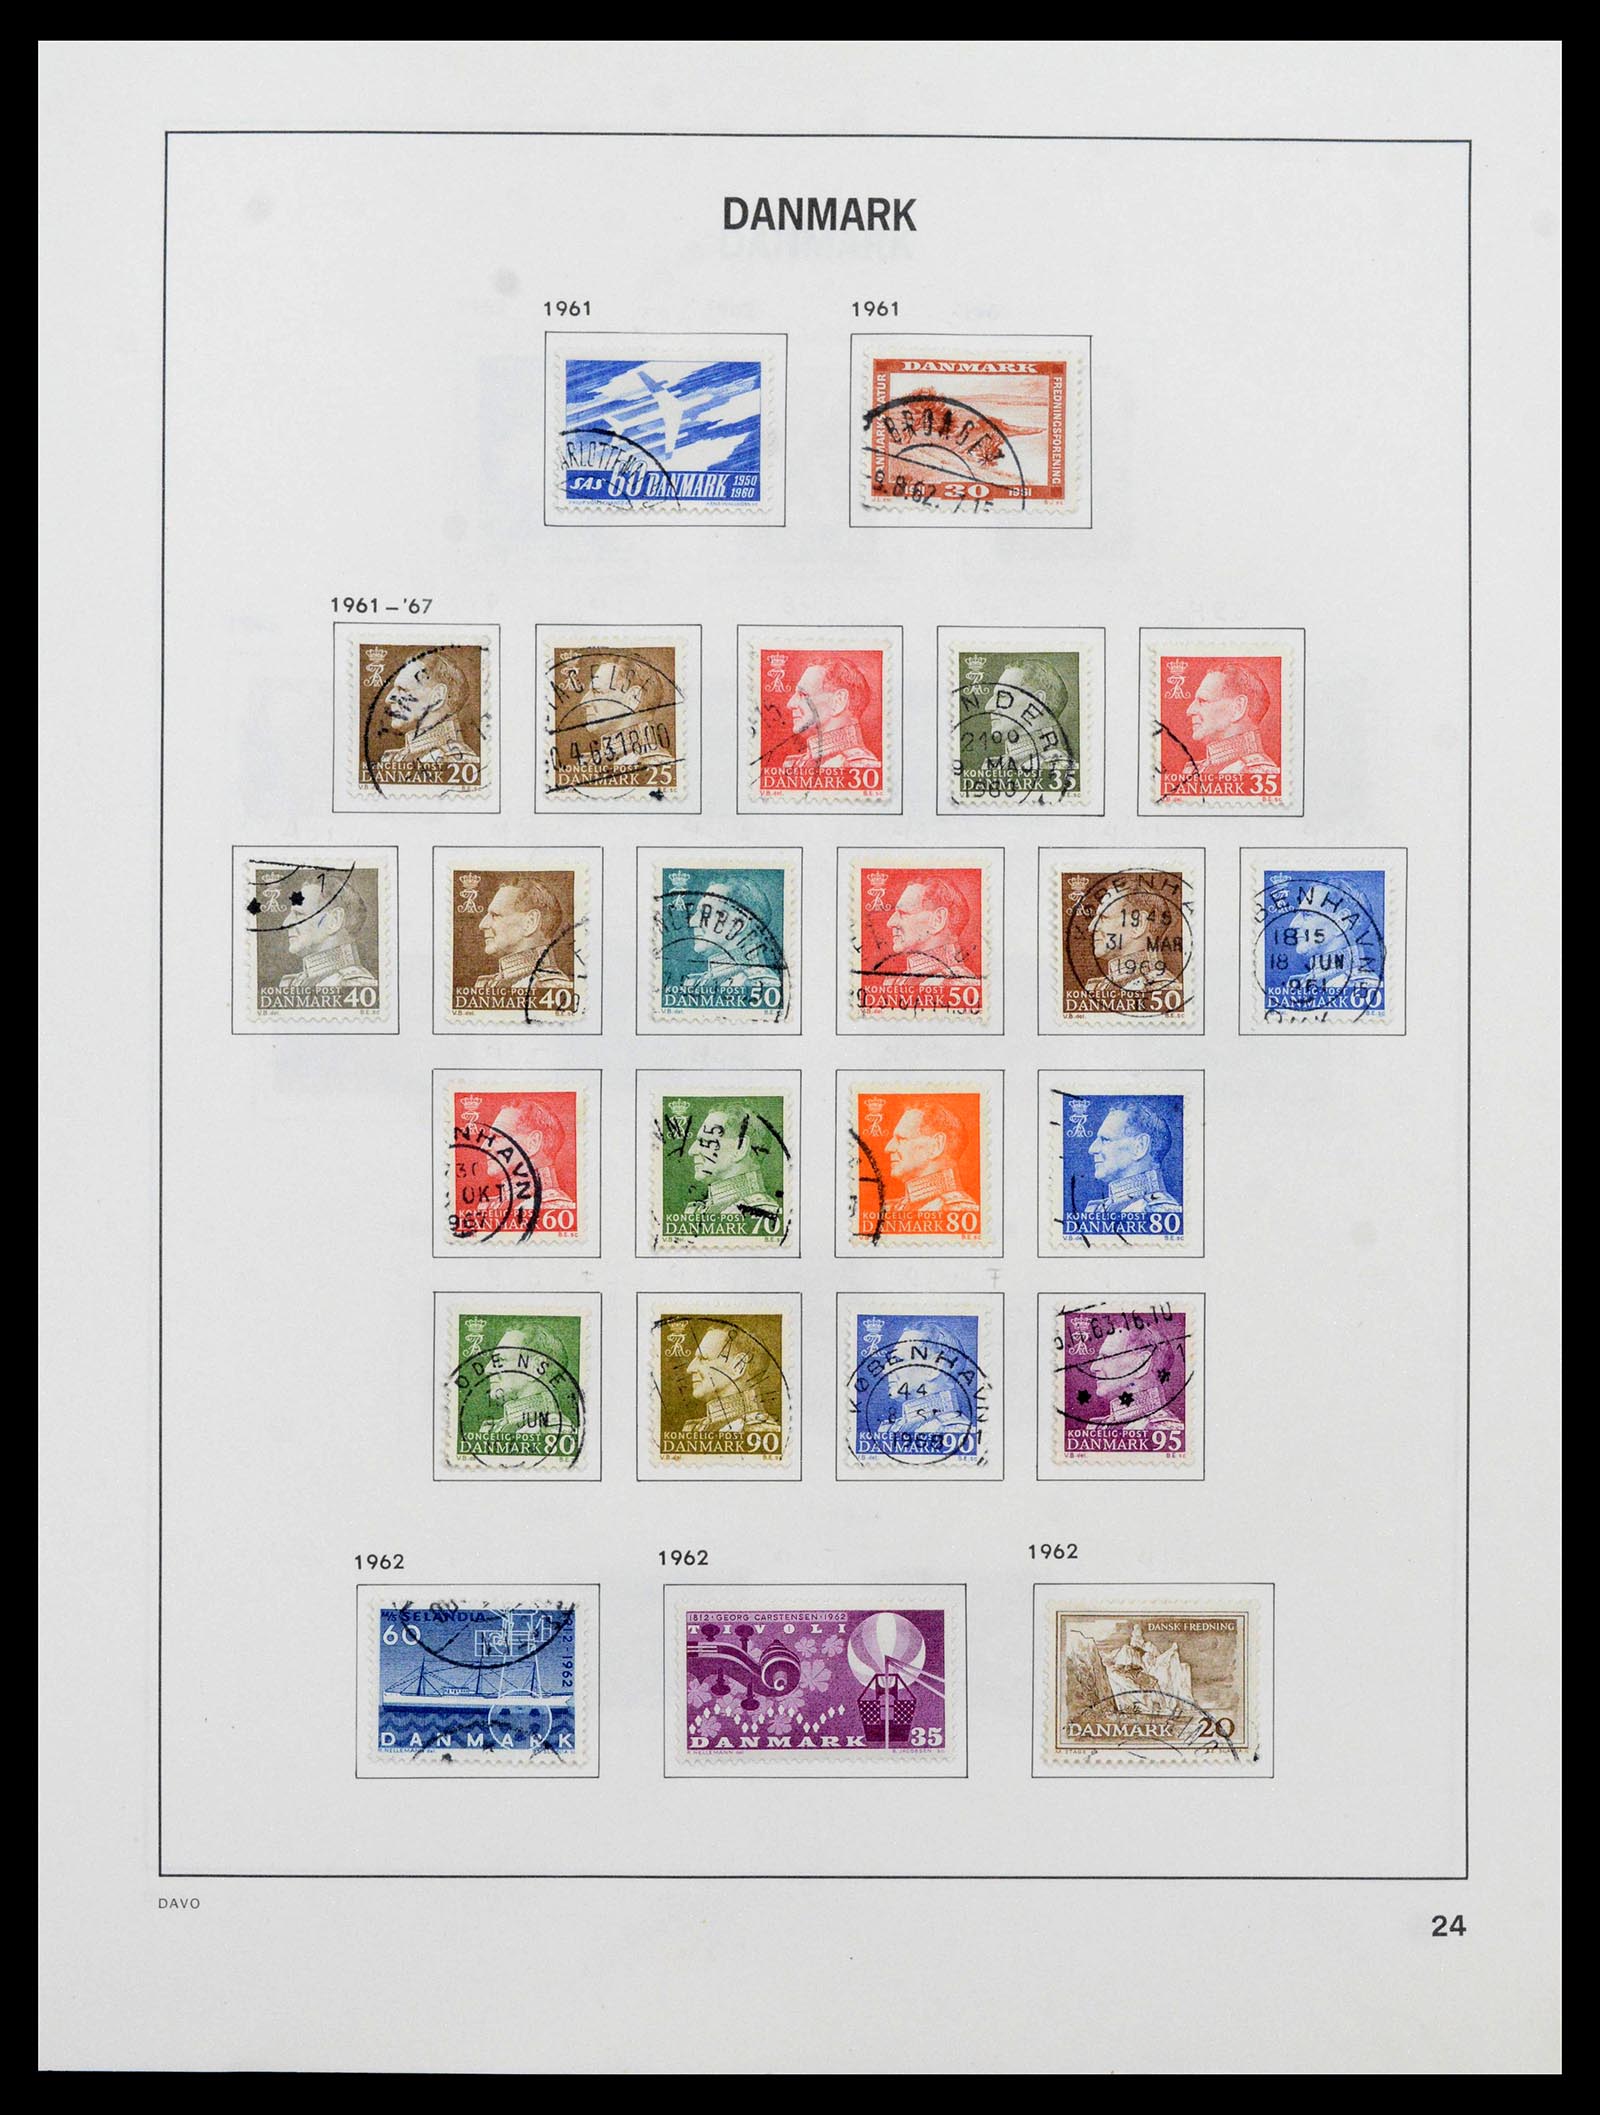 39428 0026 - Stamp collection 39428 Denmark 1851-2019.